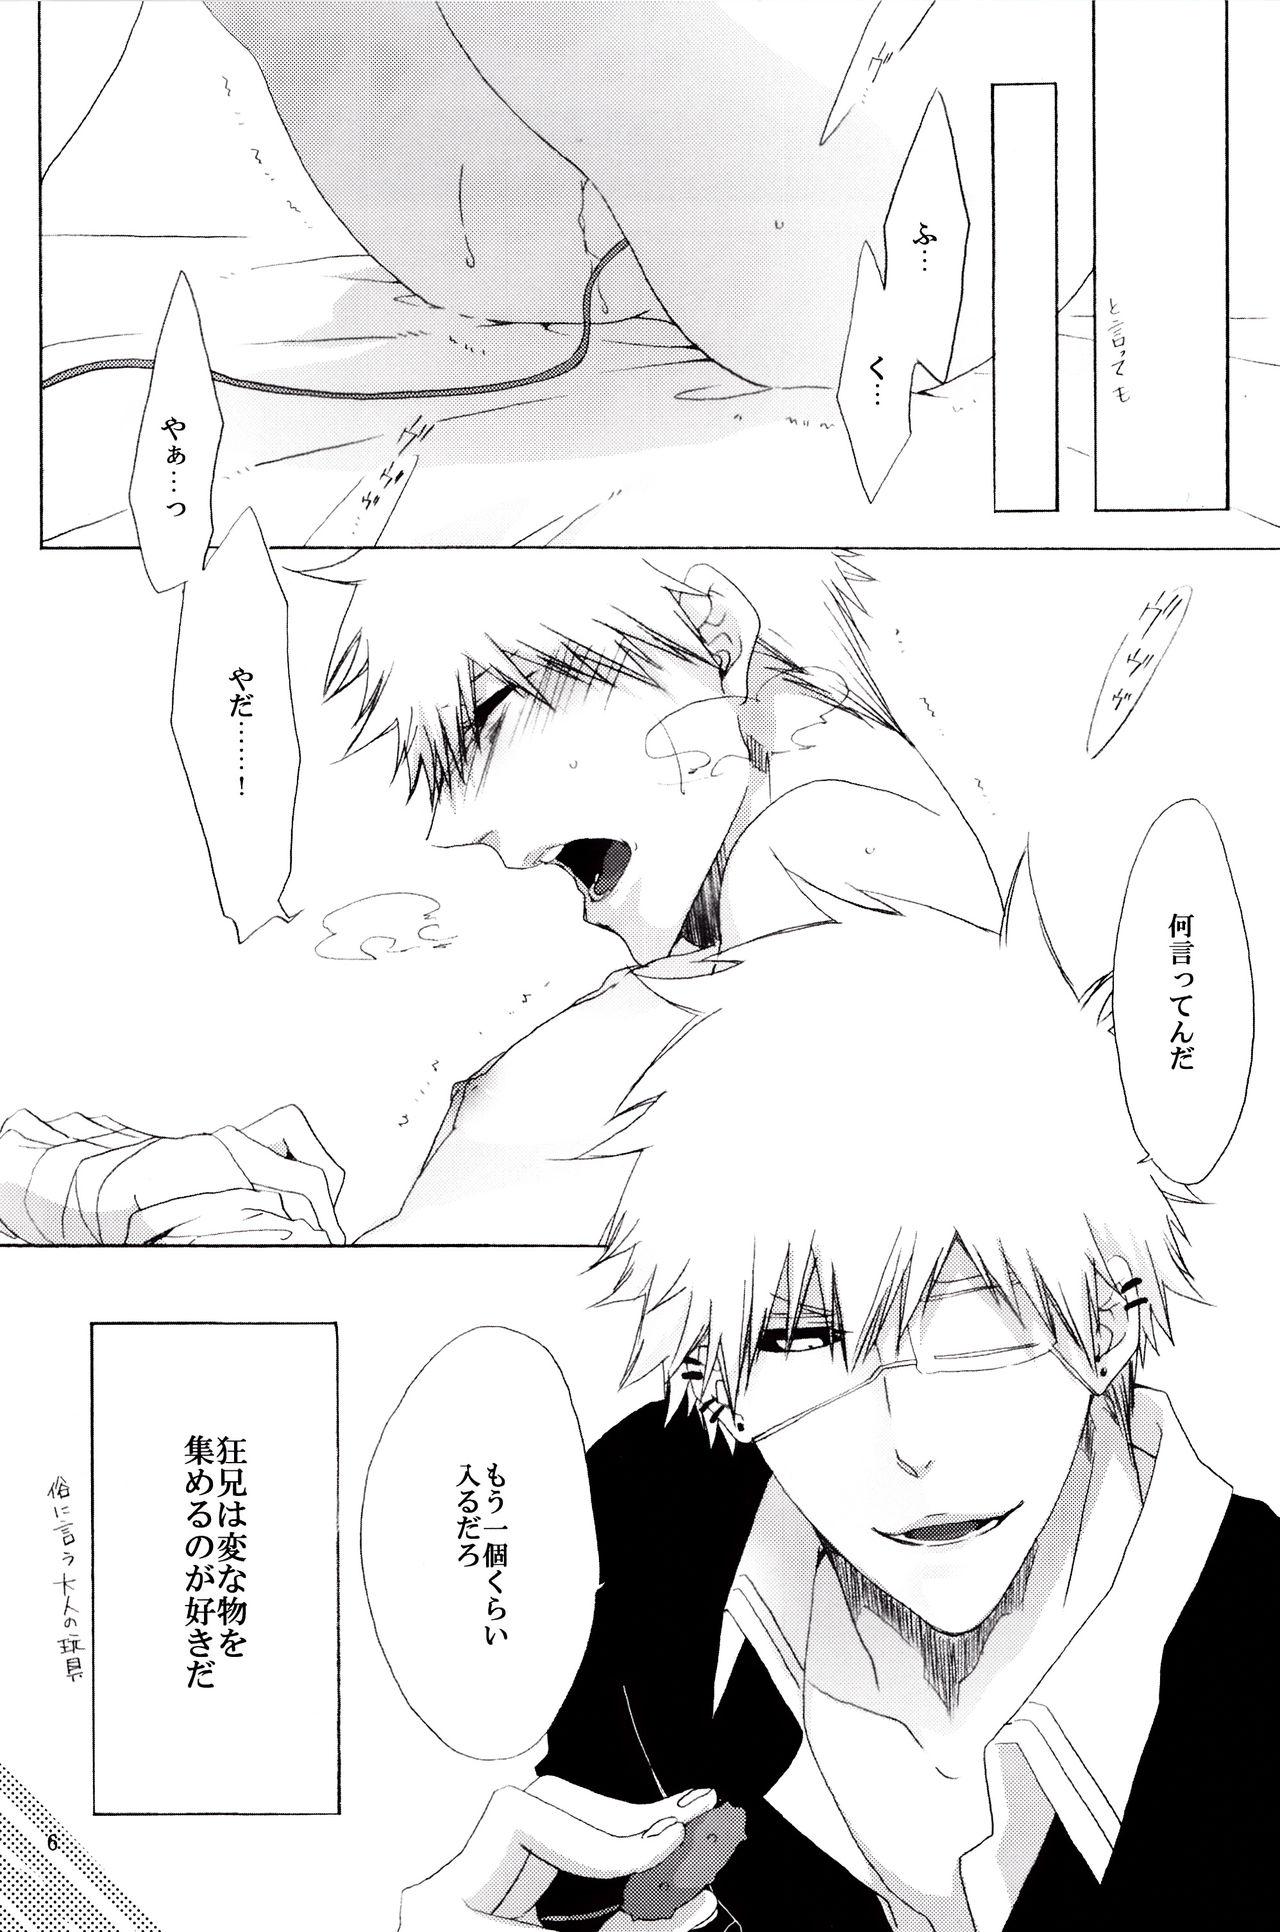 Blowing Trust Me - Bleach Famosa - Page 7